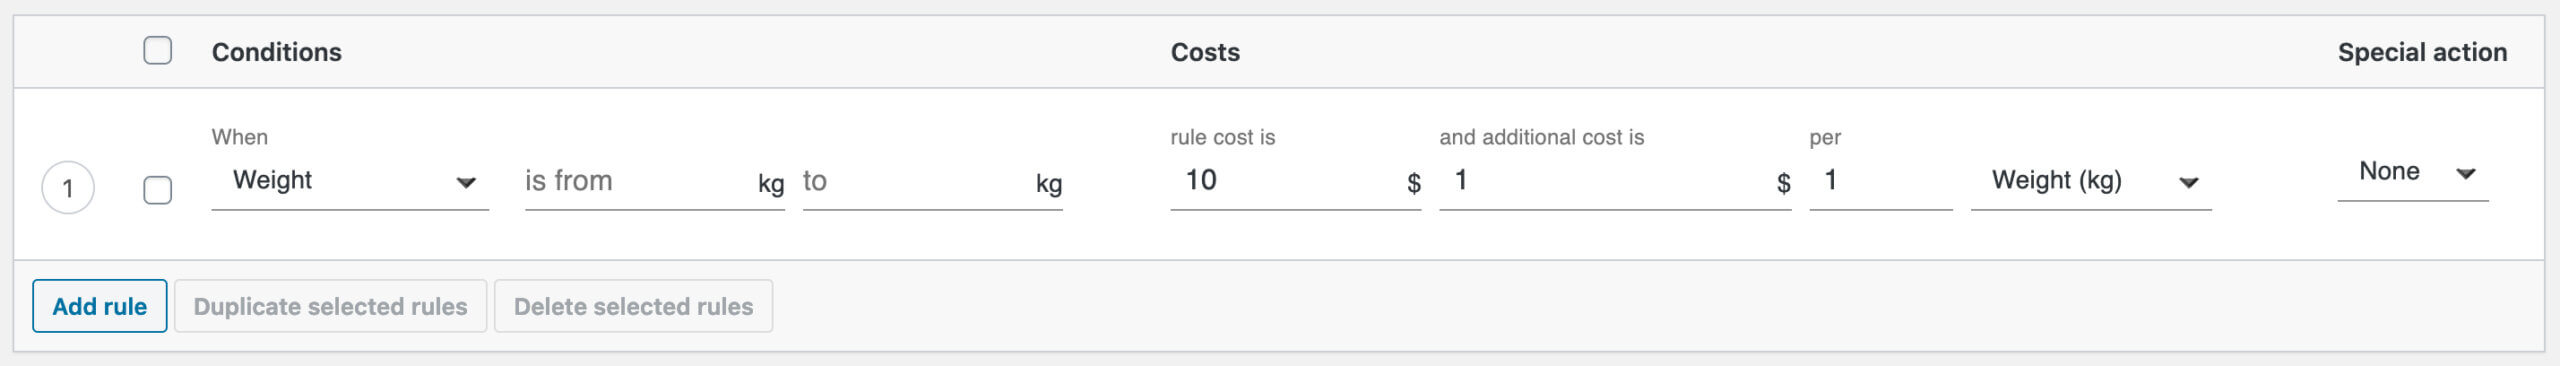 Shipping cost per weight - PRO rule